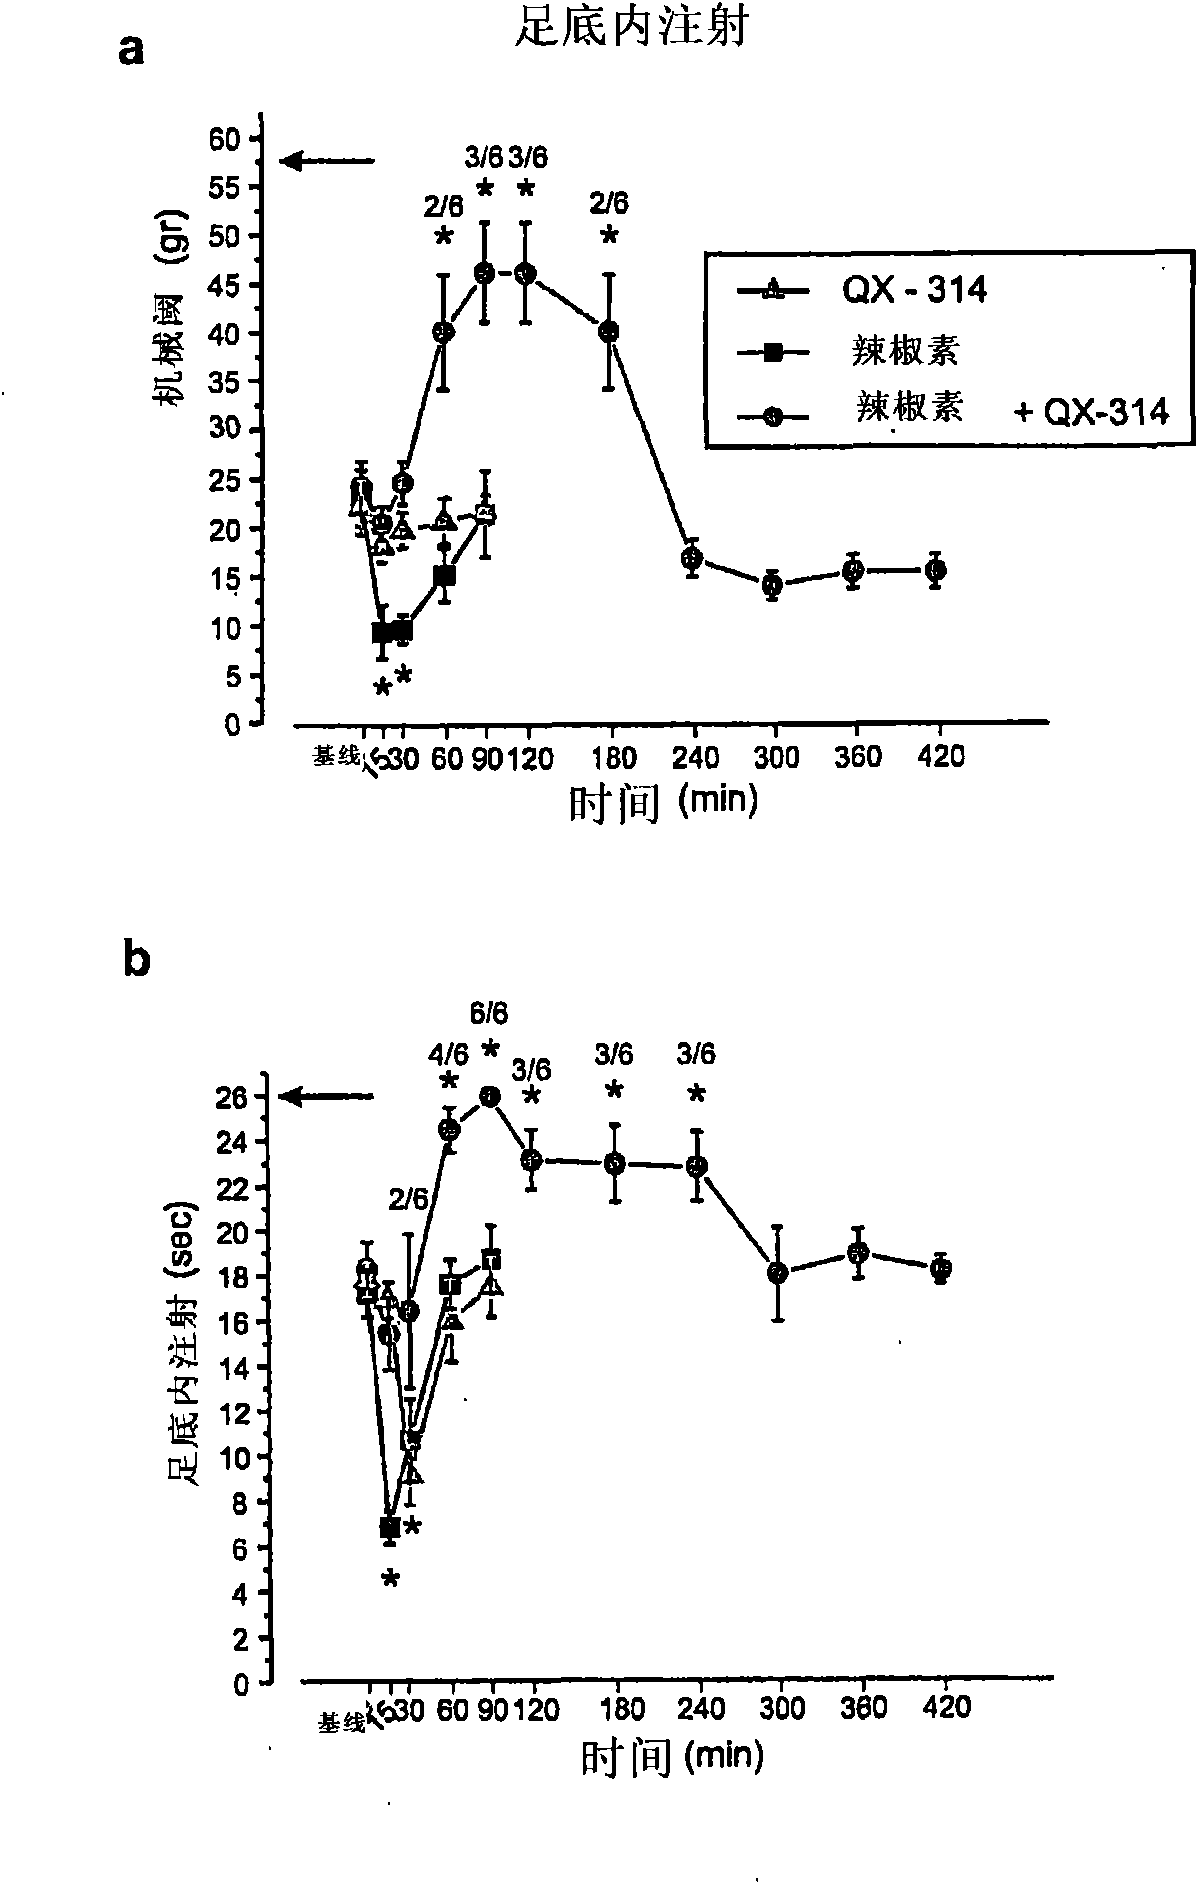 Methods, compositions, and kits for treating pain and pruritis